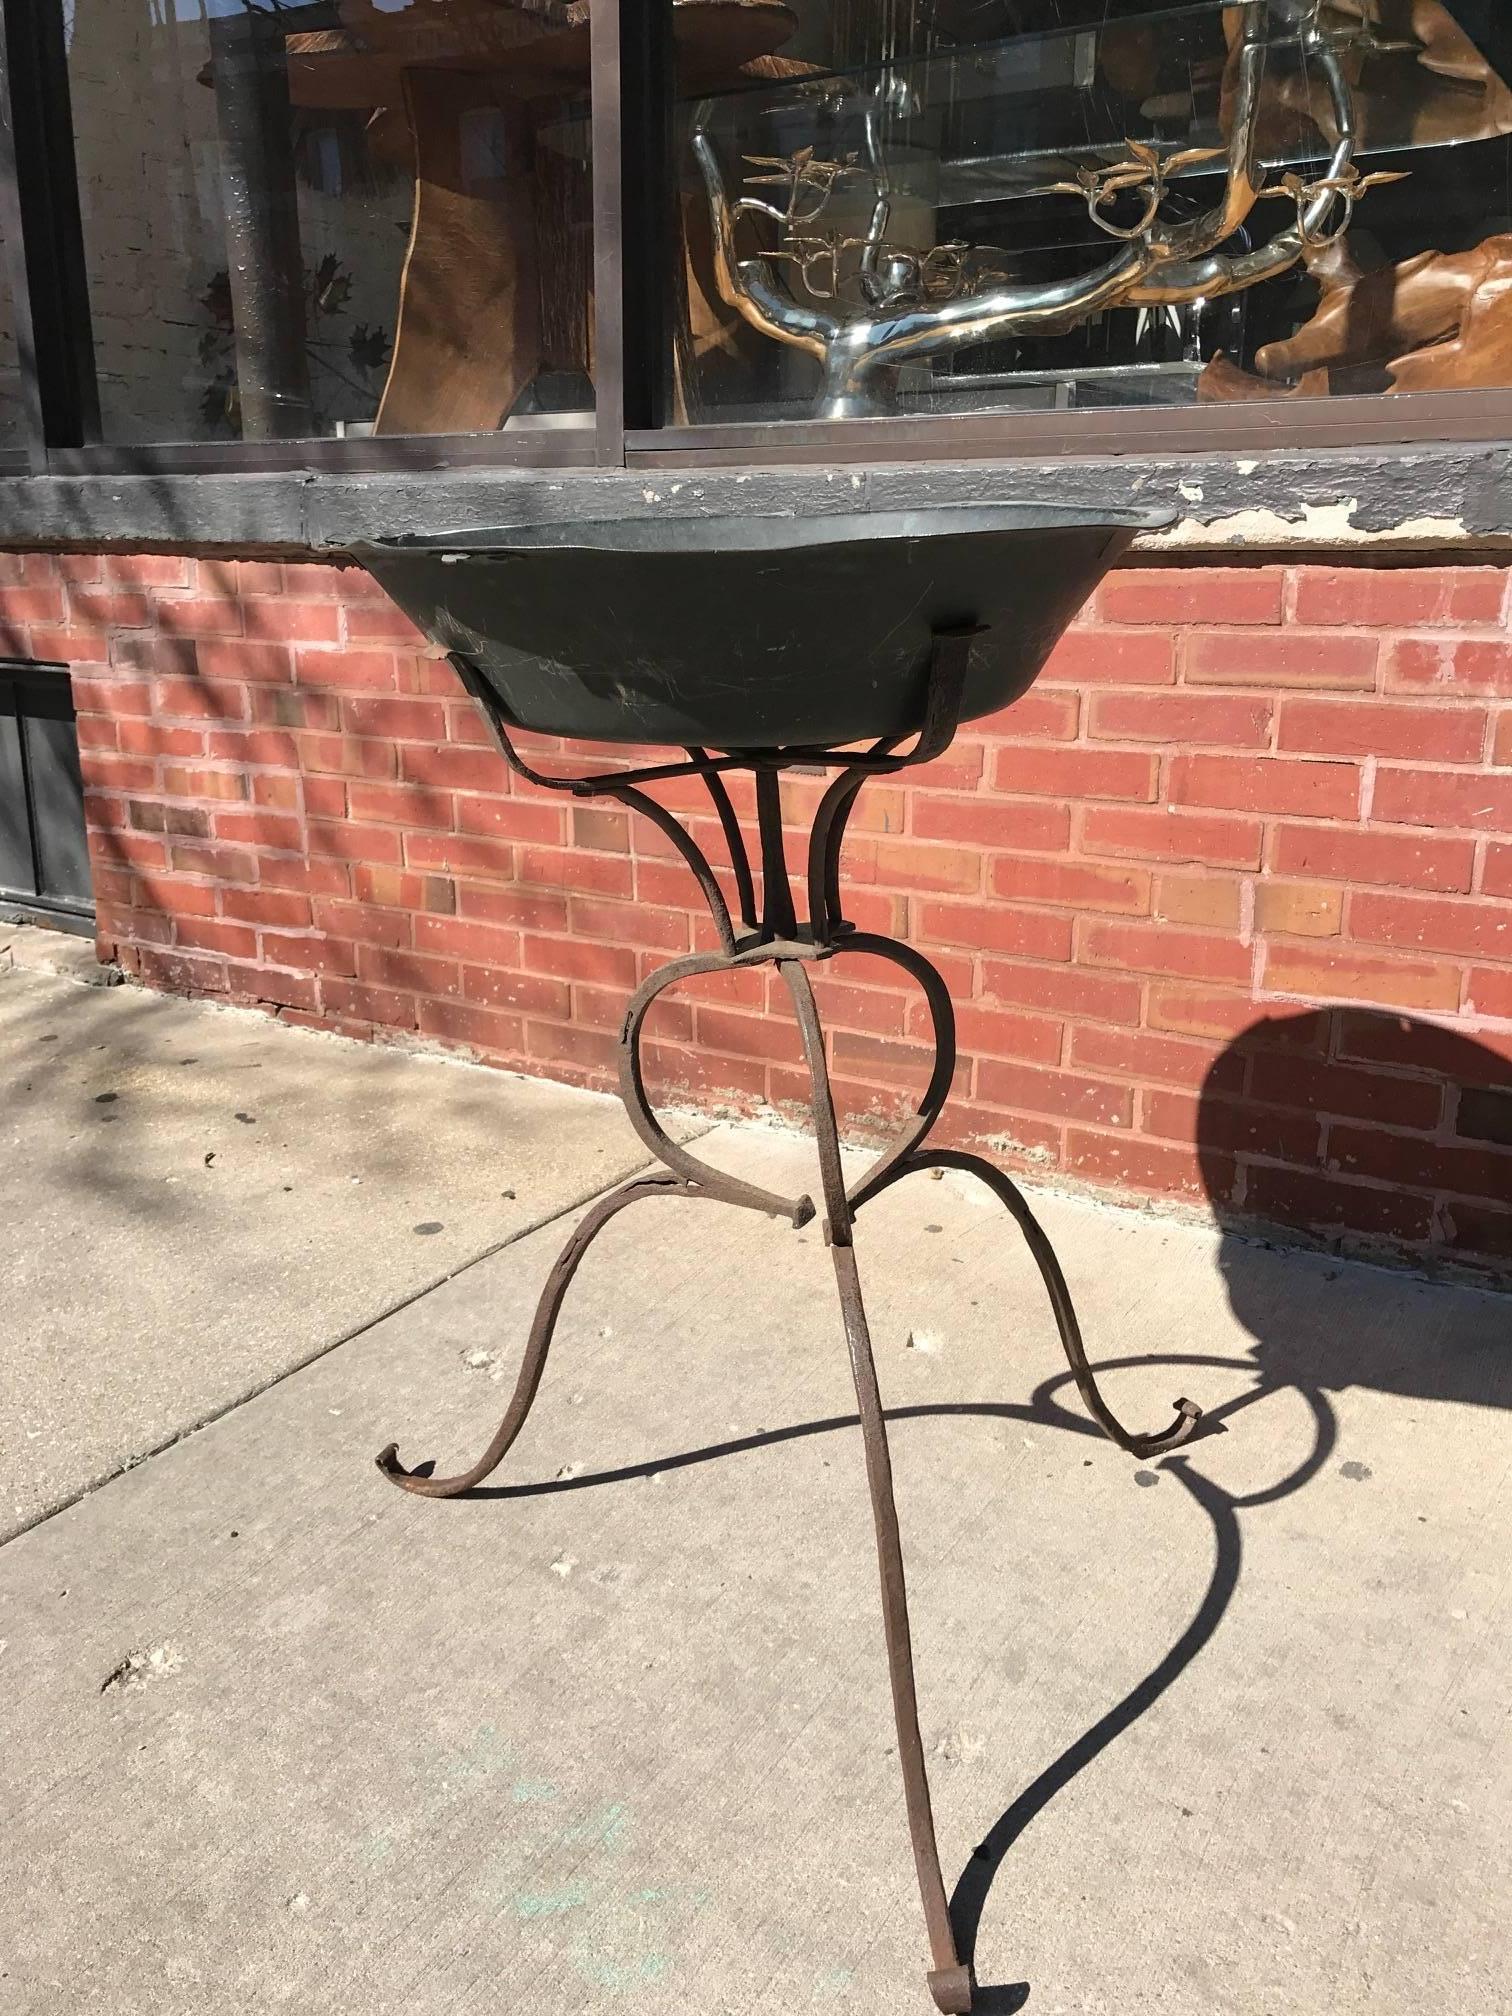 Wrought iron 18th Century plant stand. It might be earlier.
Fantastic simple rustic design. Highly sculptural would also make for a great bird bath.